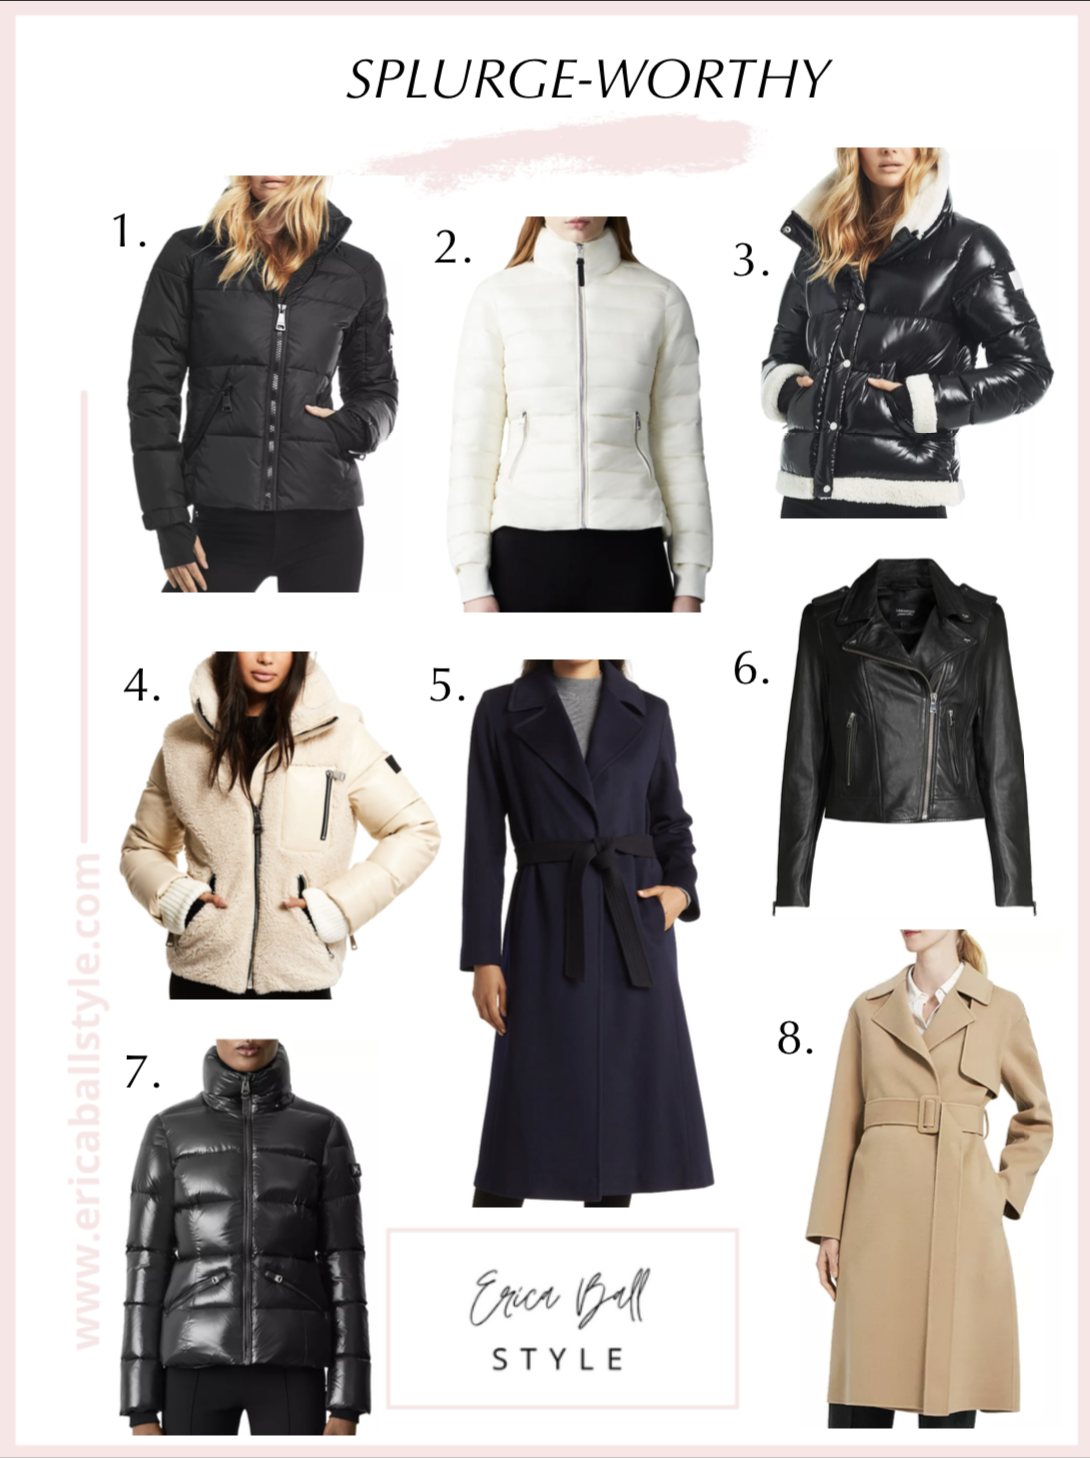 The Best Winter Coats to Help You Brave the Cold, According to Our Testing  | Winter coats women, Winter jackets women, Best winter coats